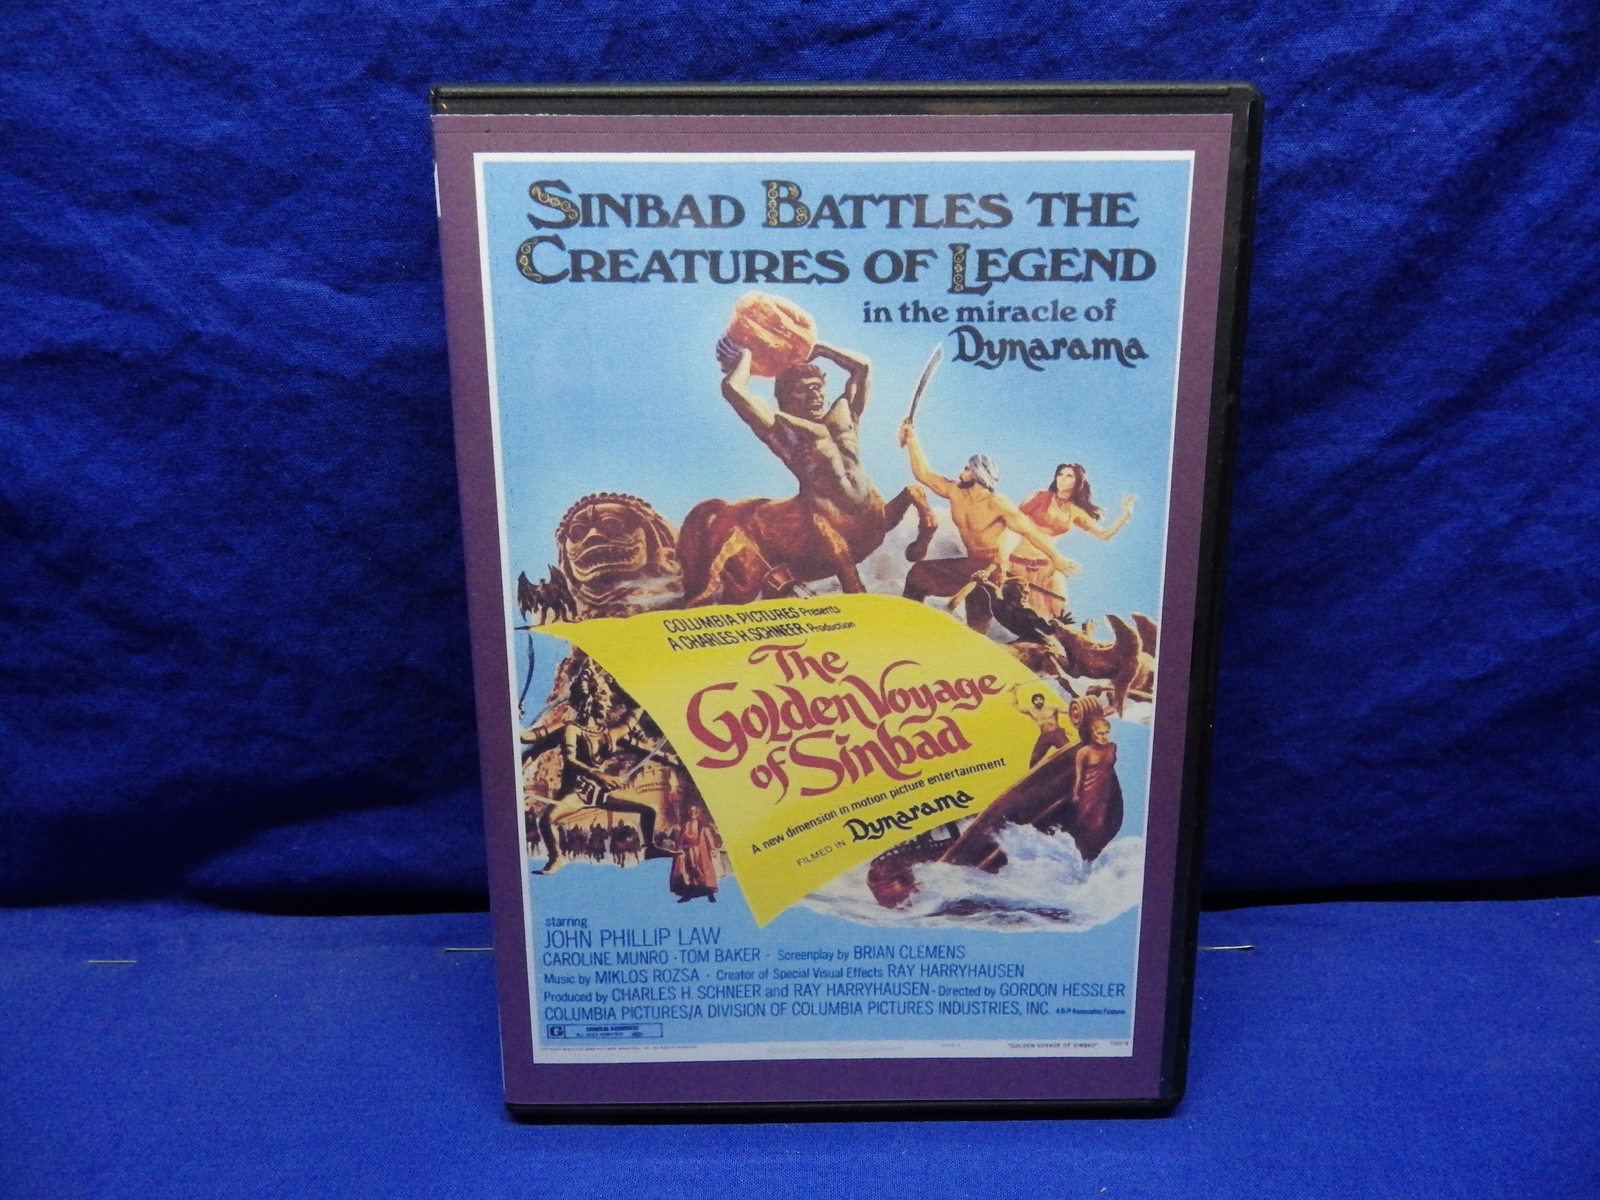 Classic Sci-Fi DVD: Columbia Pictures "The Golden Voyage Of Sinbad" (1973) - $14.95